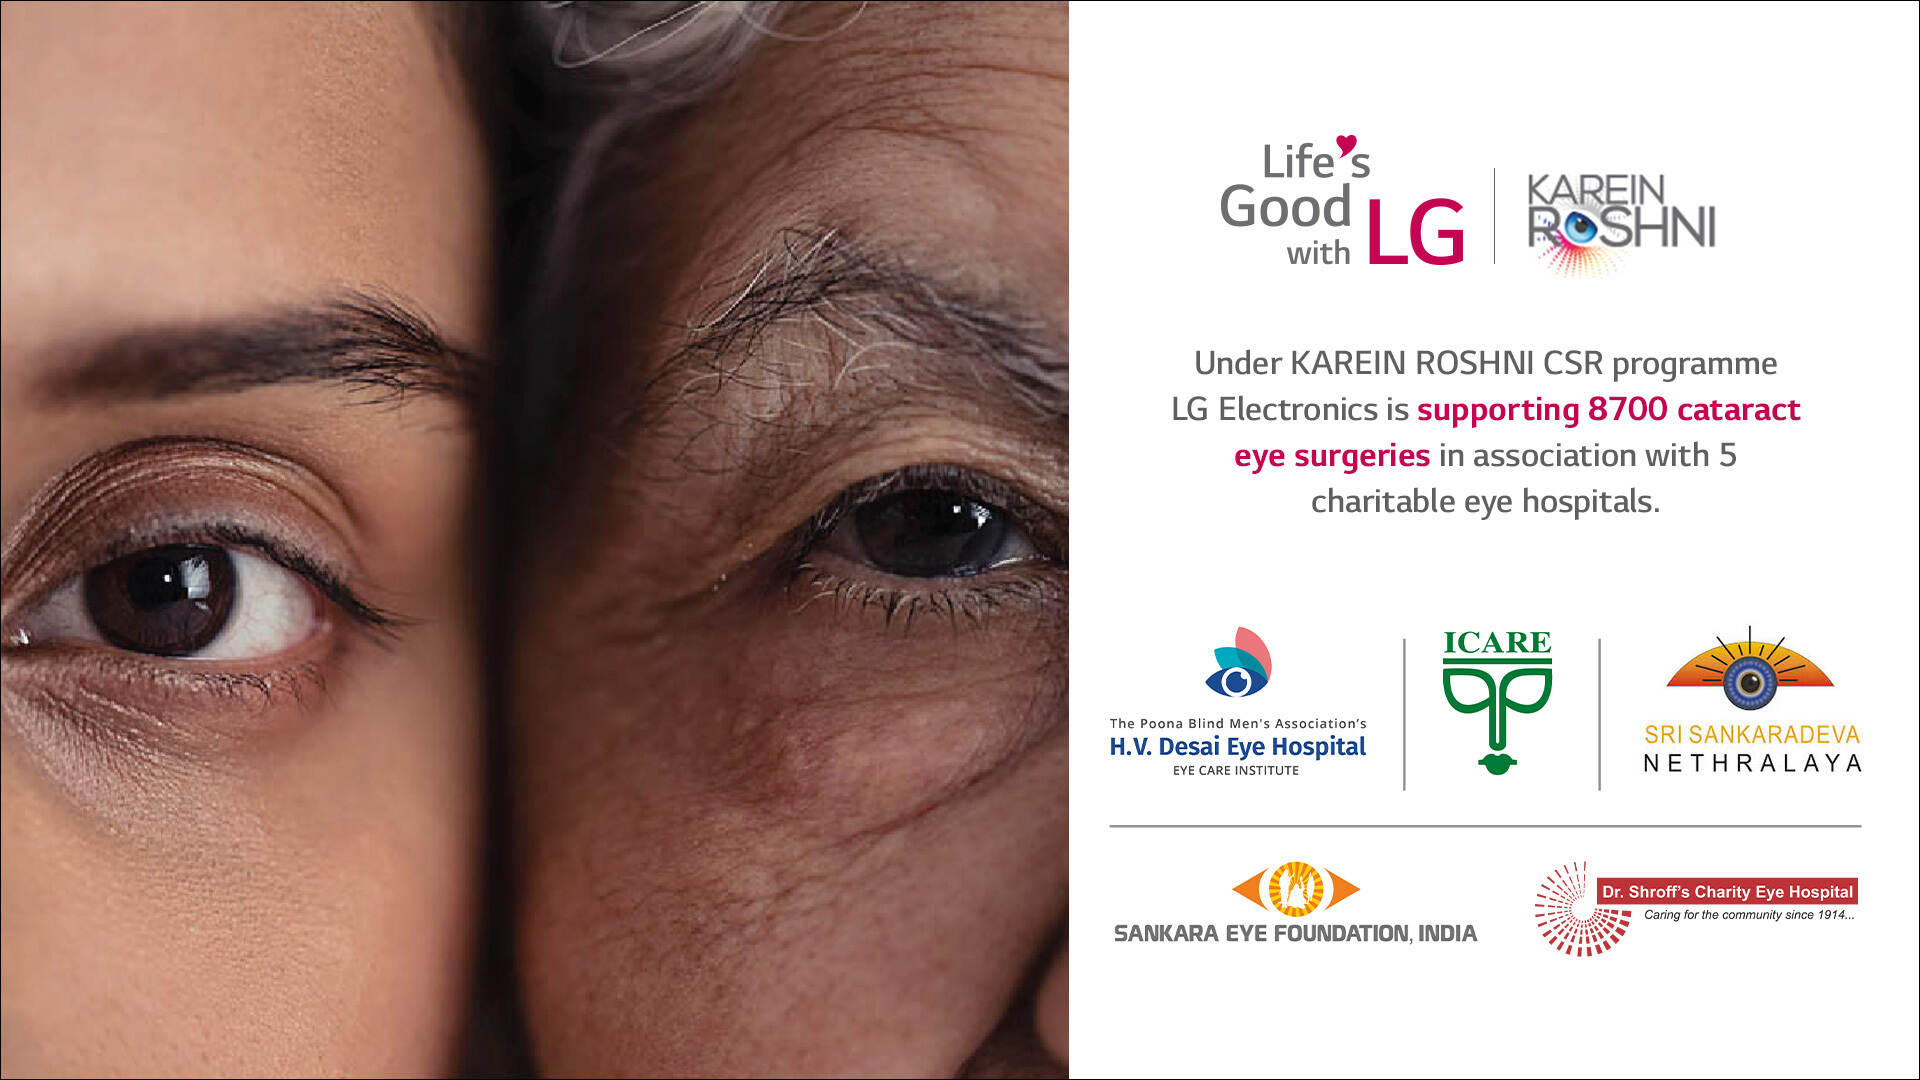 Under the programme, LG Electronics is supporting 8,700 cataract eye surgeries of visually impaired people.